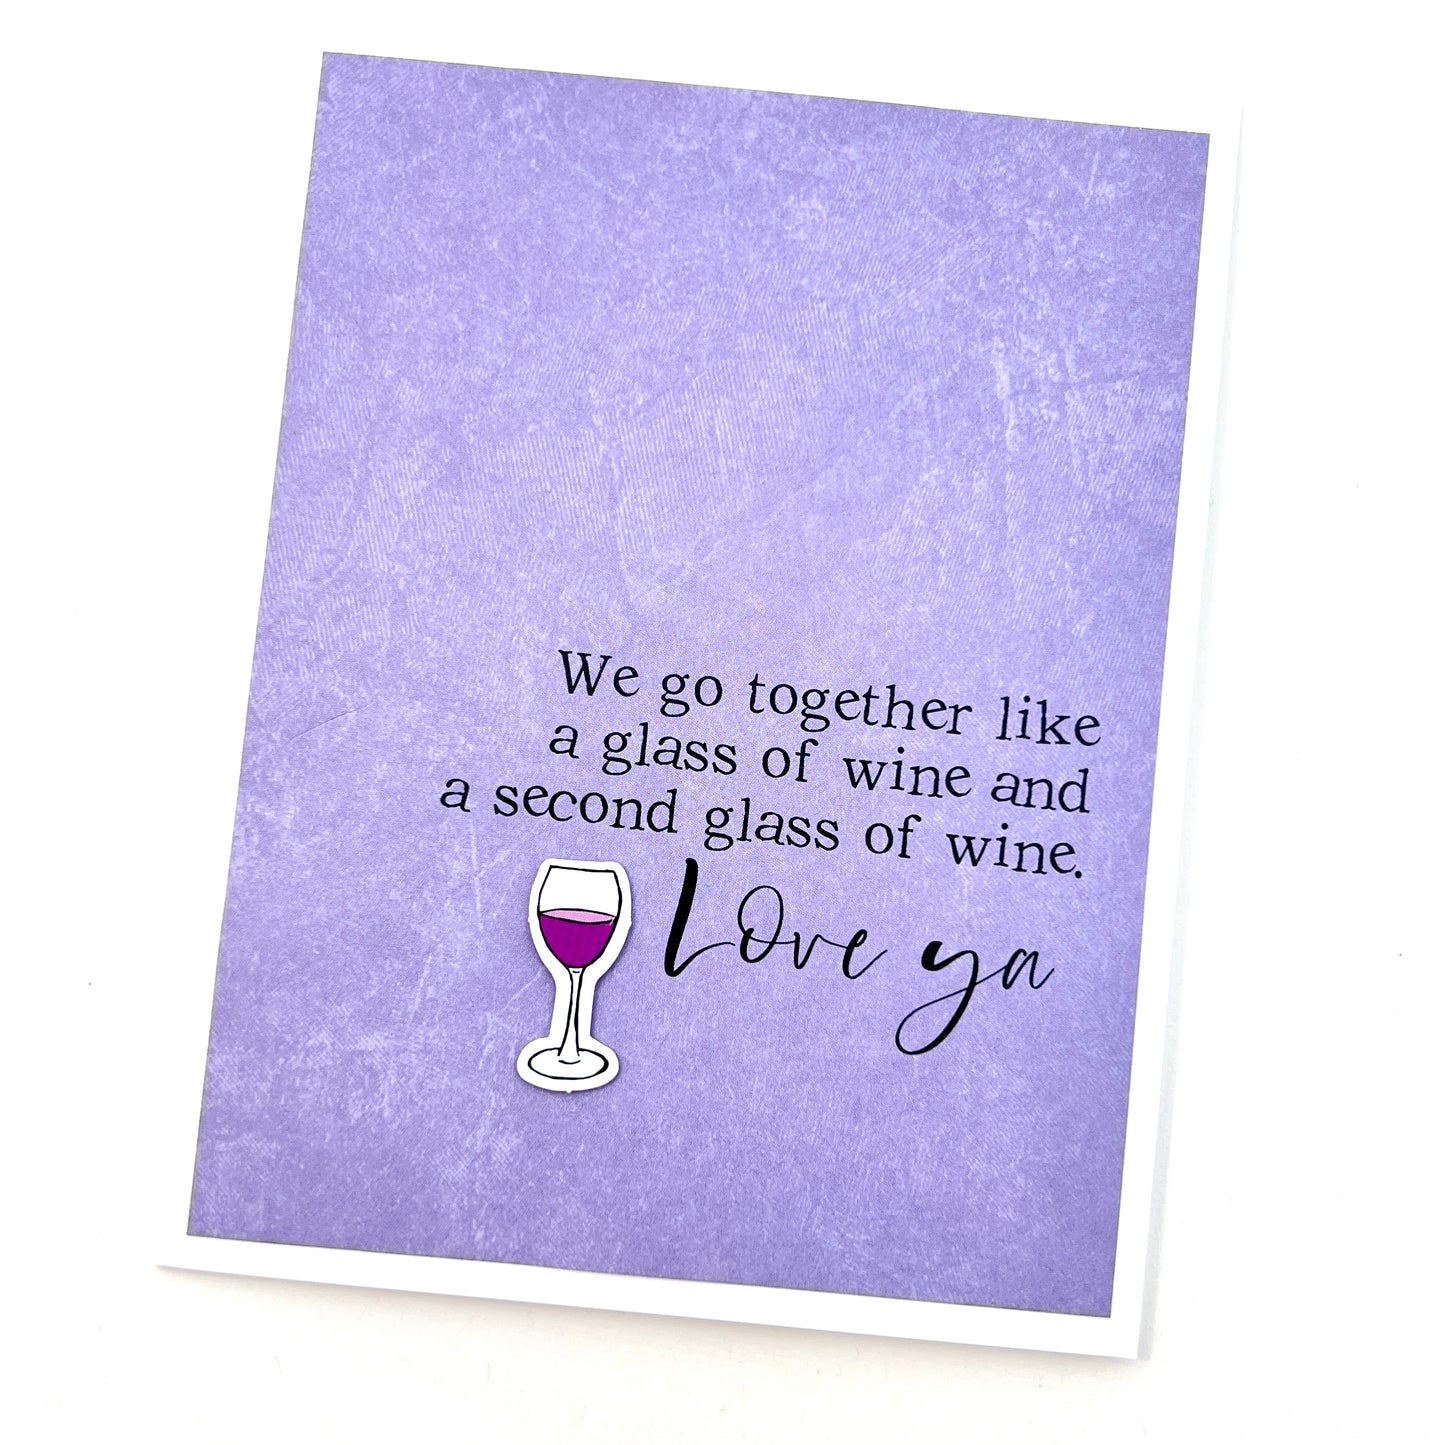 Second Glass of Wine card